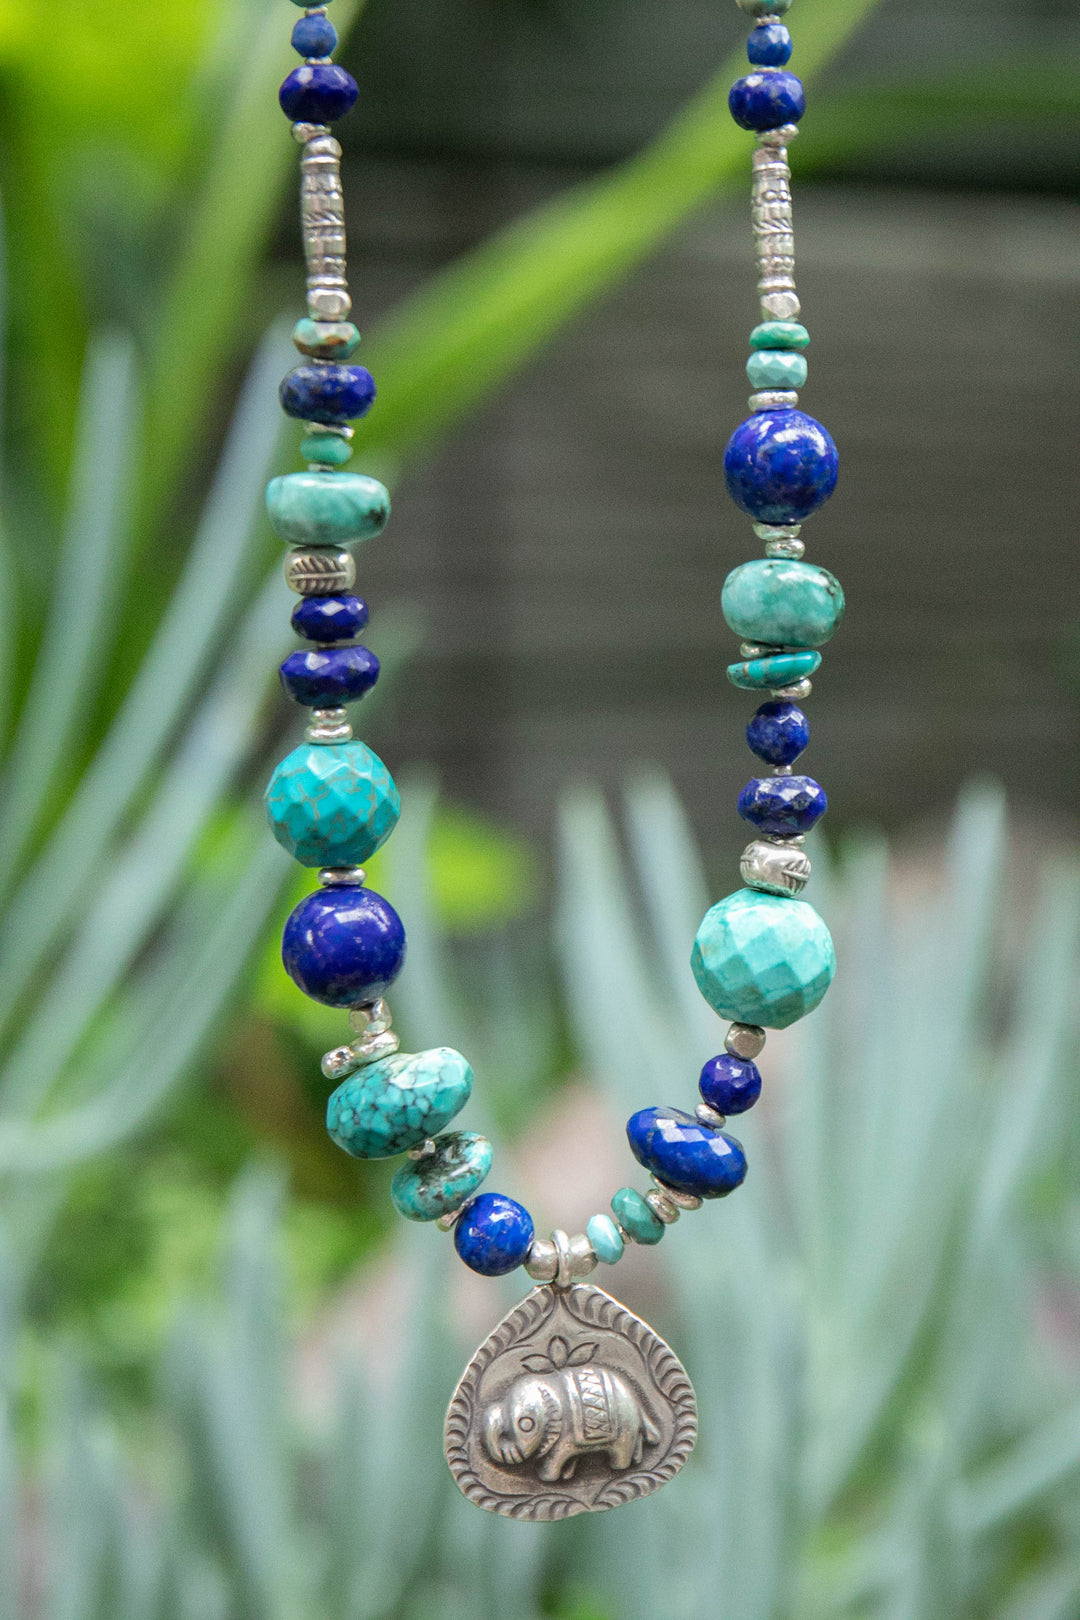 Genuine Lapis and Turquoise Necklace with Hill Tribe Silver Beads and Elephant Pendant